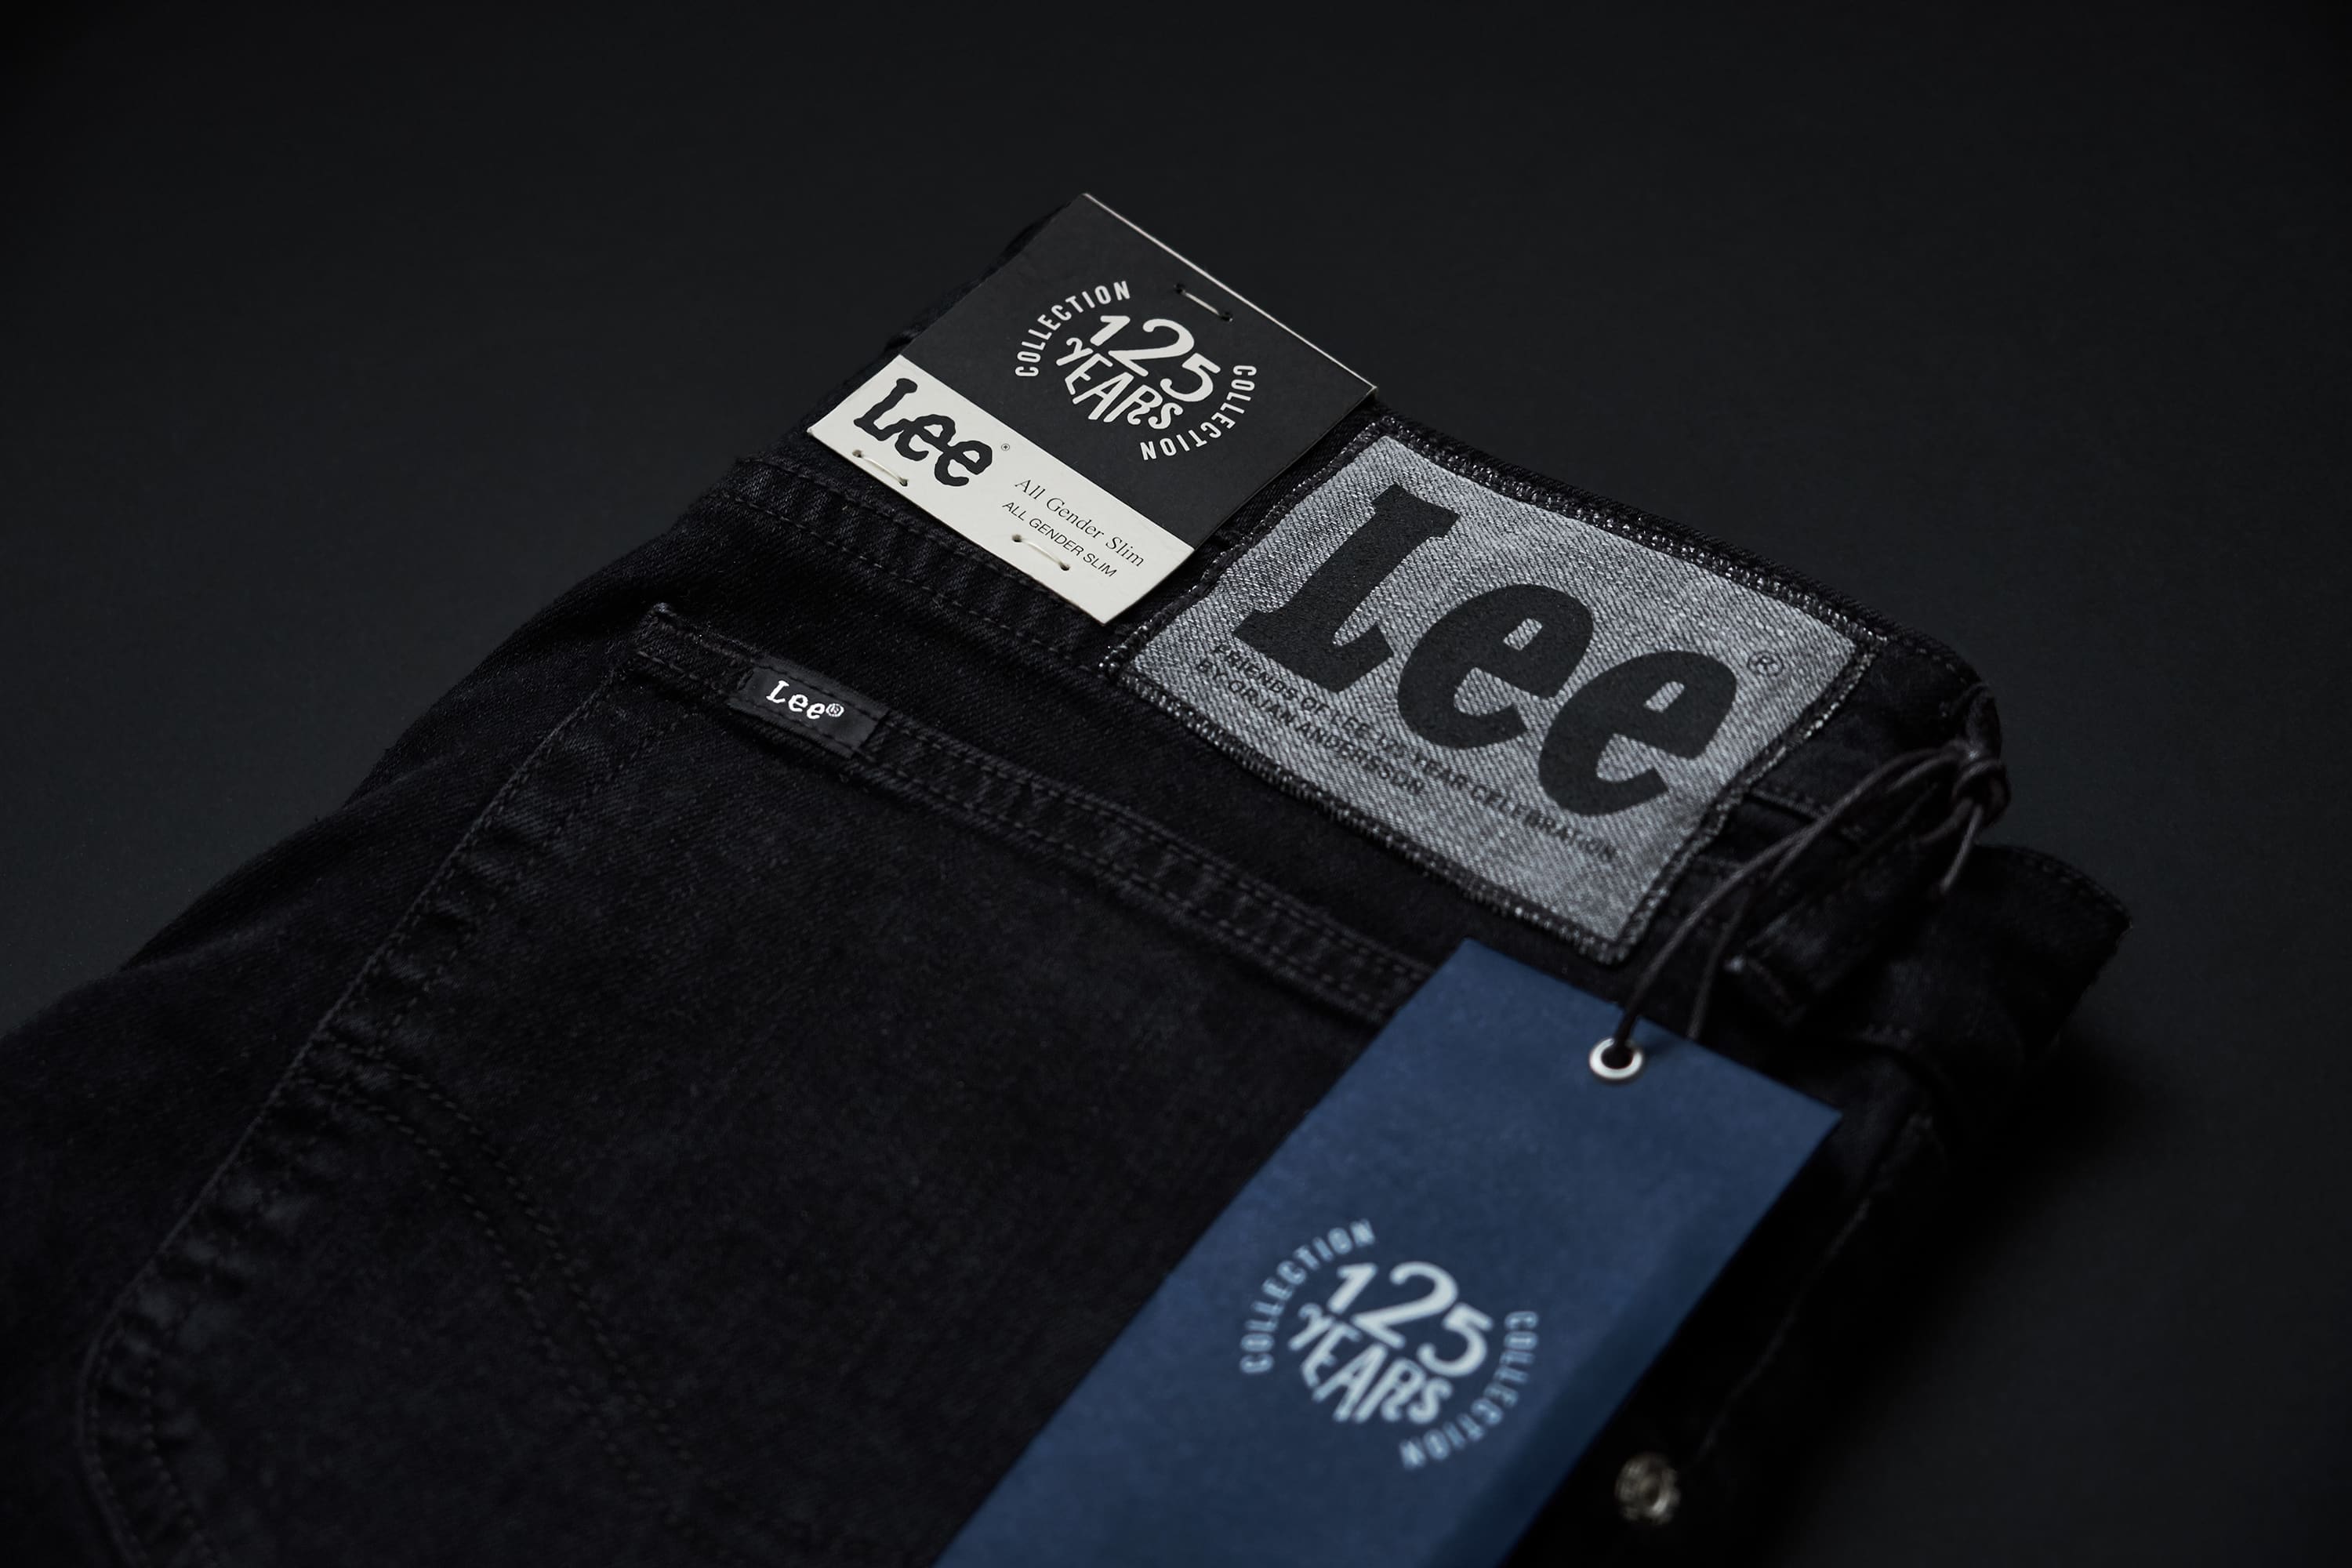 lee-jeans-125-years-label